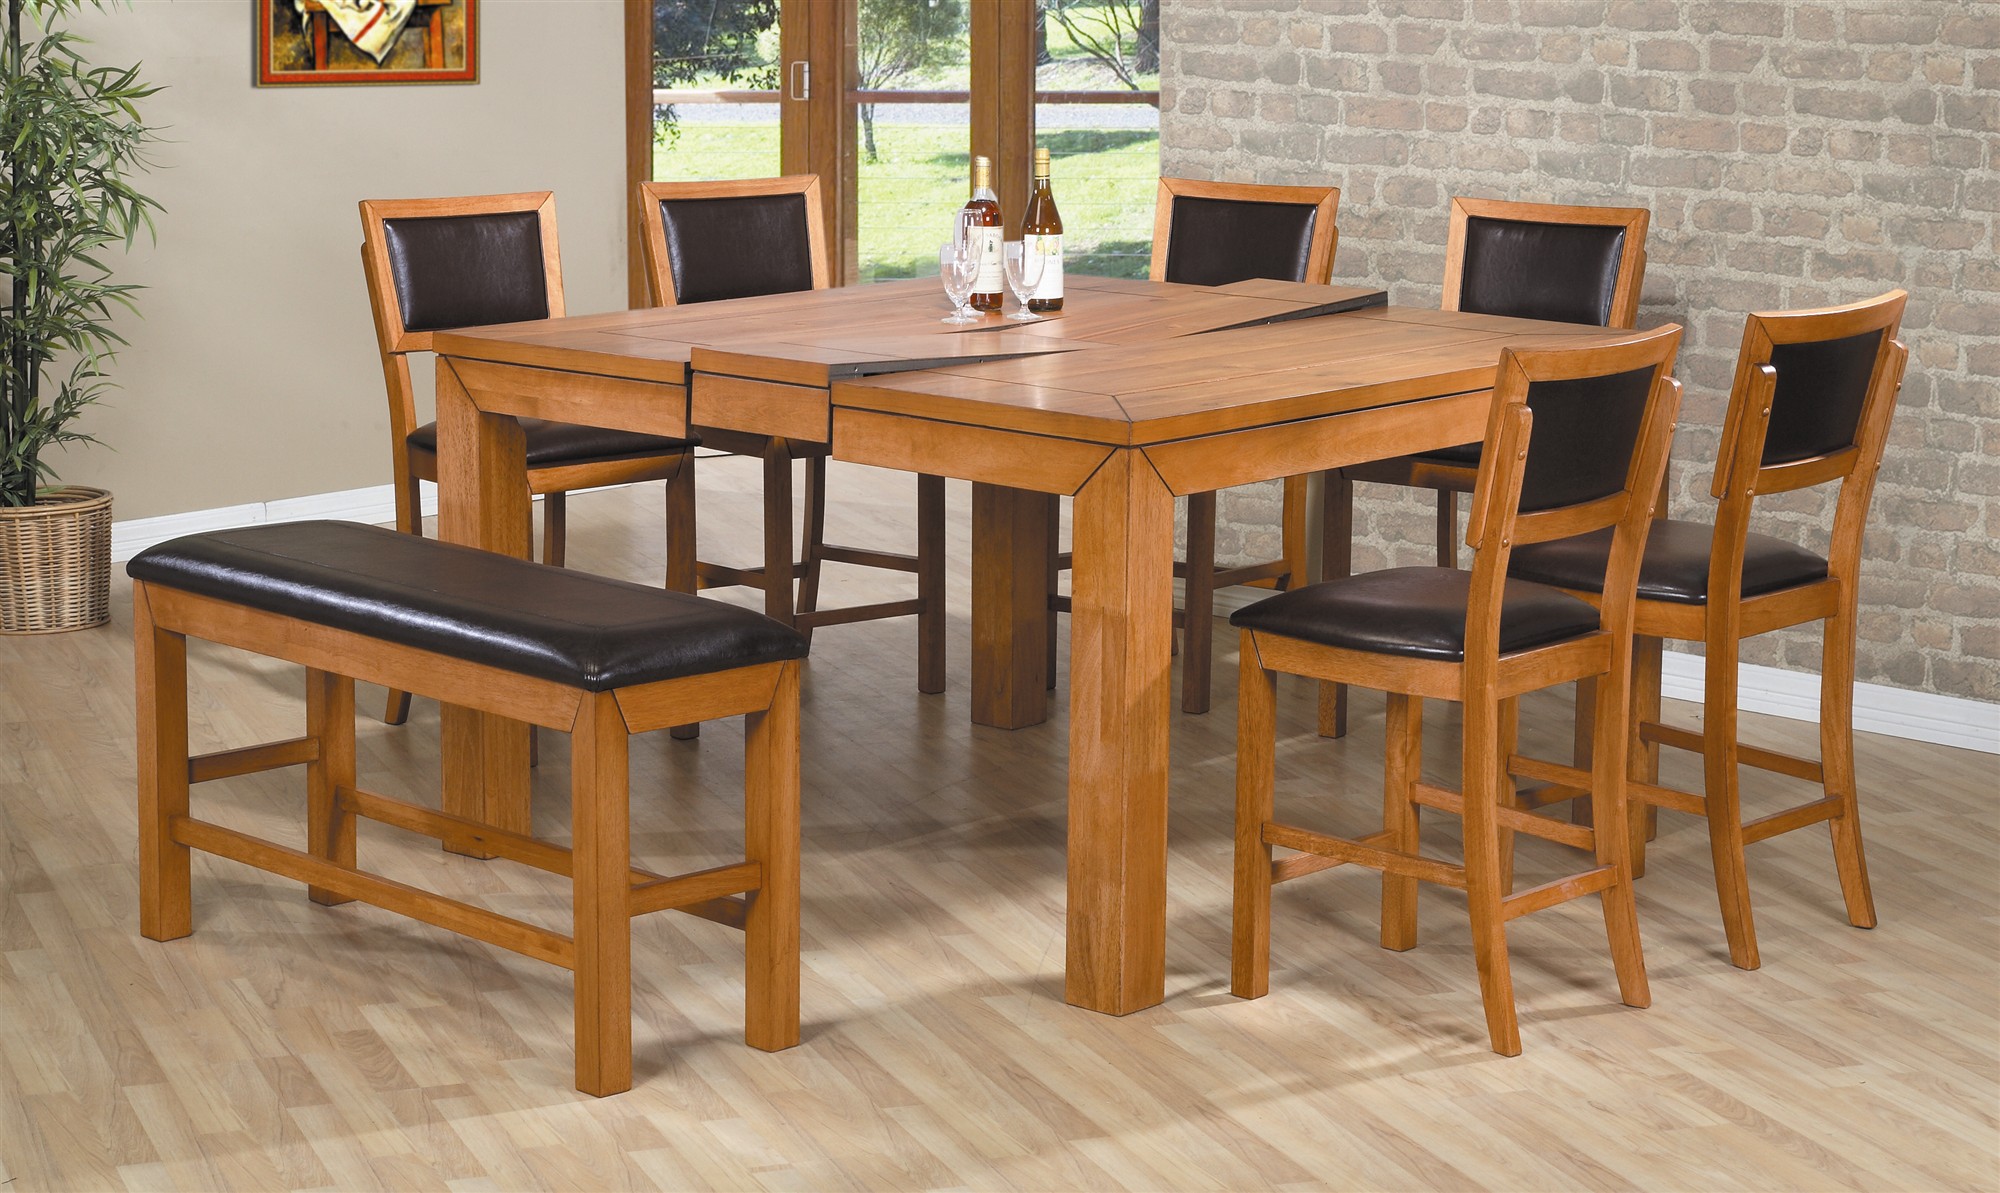 How Can Teak Patio Furnishing Bring Elegance To Your Garden?